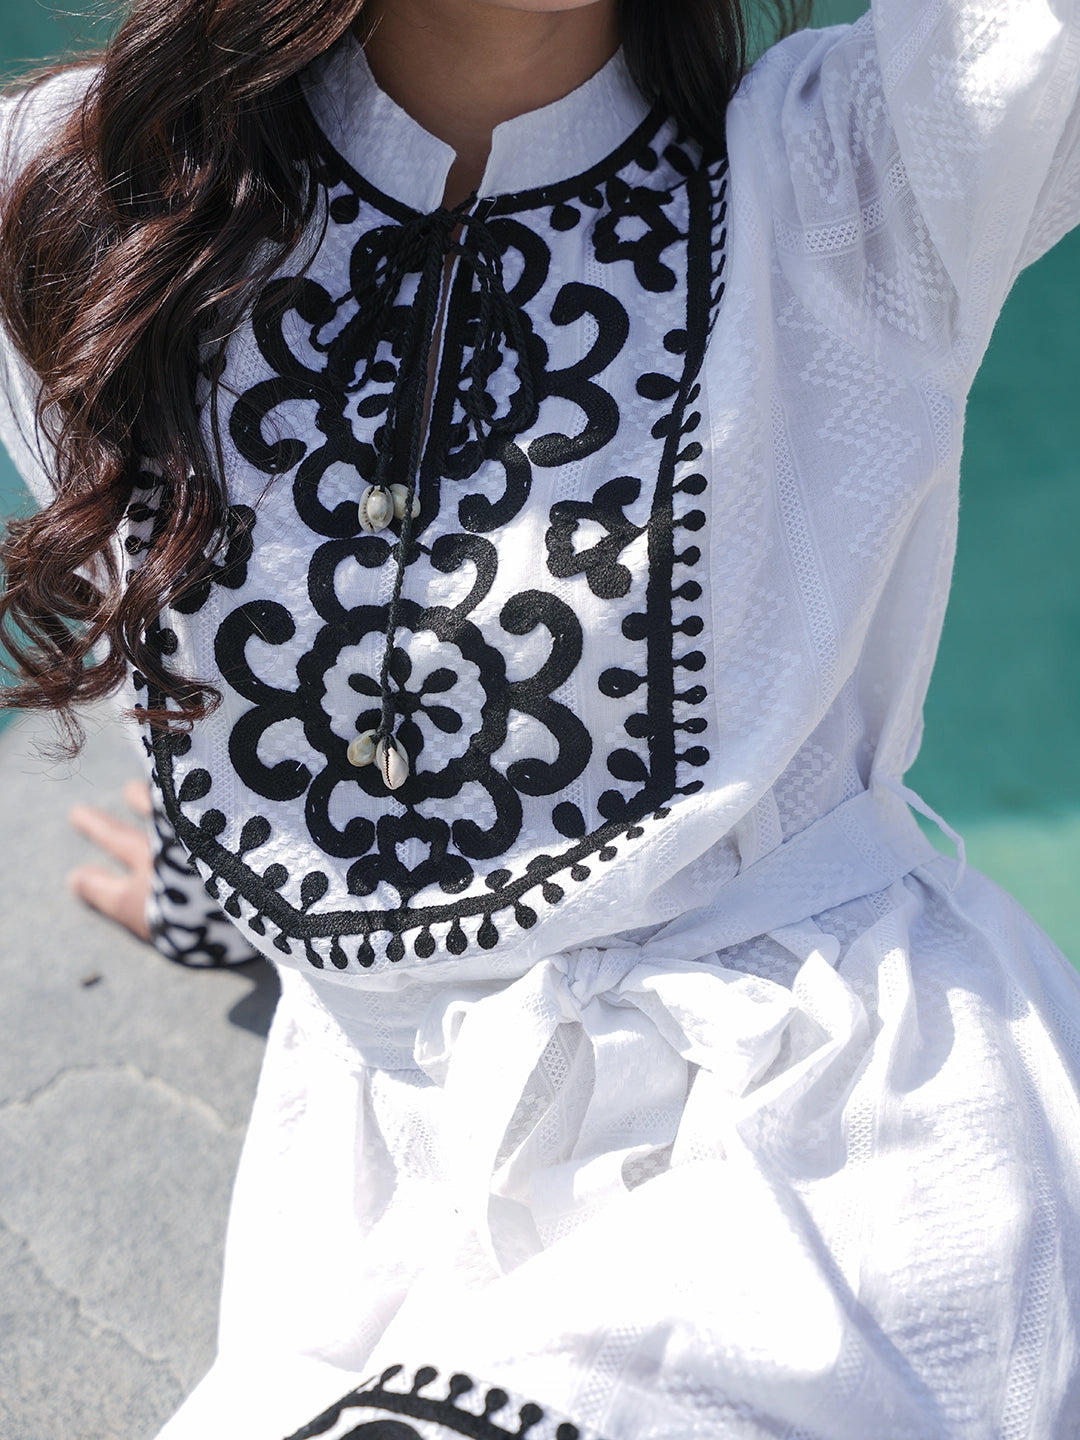 Monochrome Muse: White Dress with Black Embroidery